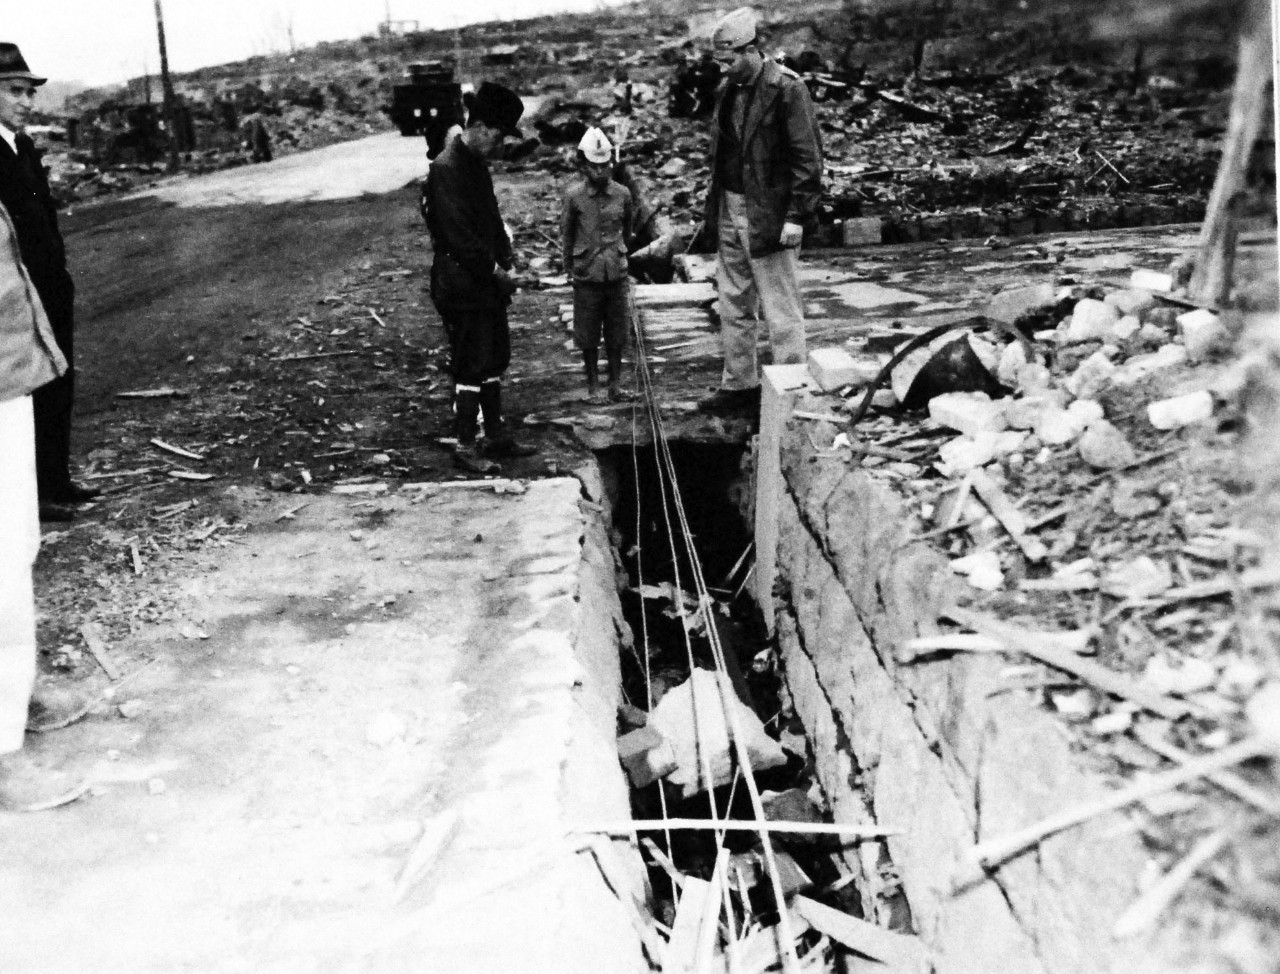 127-GW-1643-147003:     Nagasaki, Japan, 1945.    Street gutter blocked by debris.      Photographed by Rogers, November 23, 1945.        Official U.S. Marine Corps Photograph, now in the collections of the National Archives.  (2016/10/25).